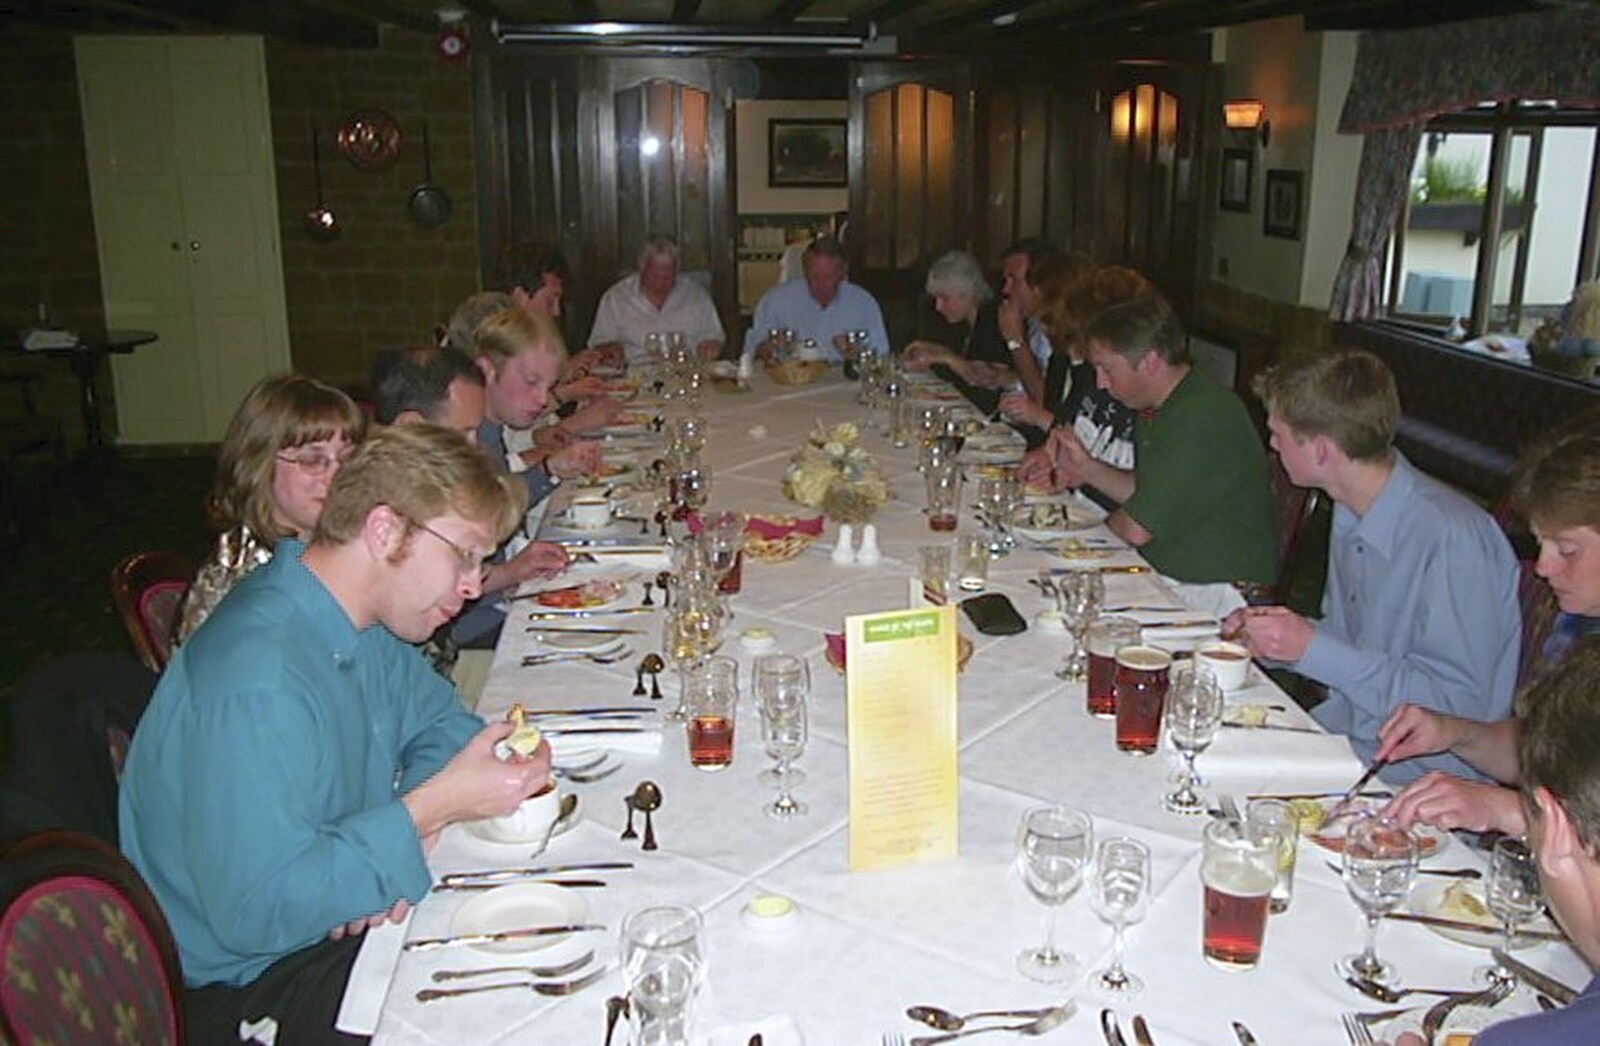 Time for dinner from The BSCC Annual Bike Ride, Marquess of Exeter, Oakham, Rutland - 12th May 2001